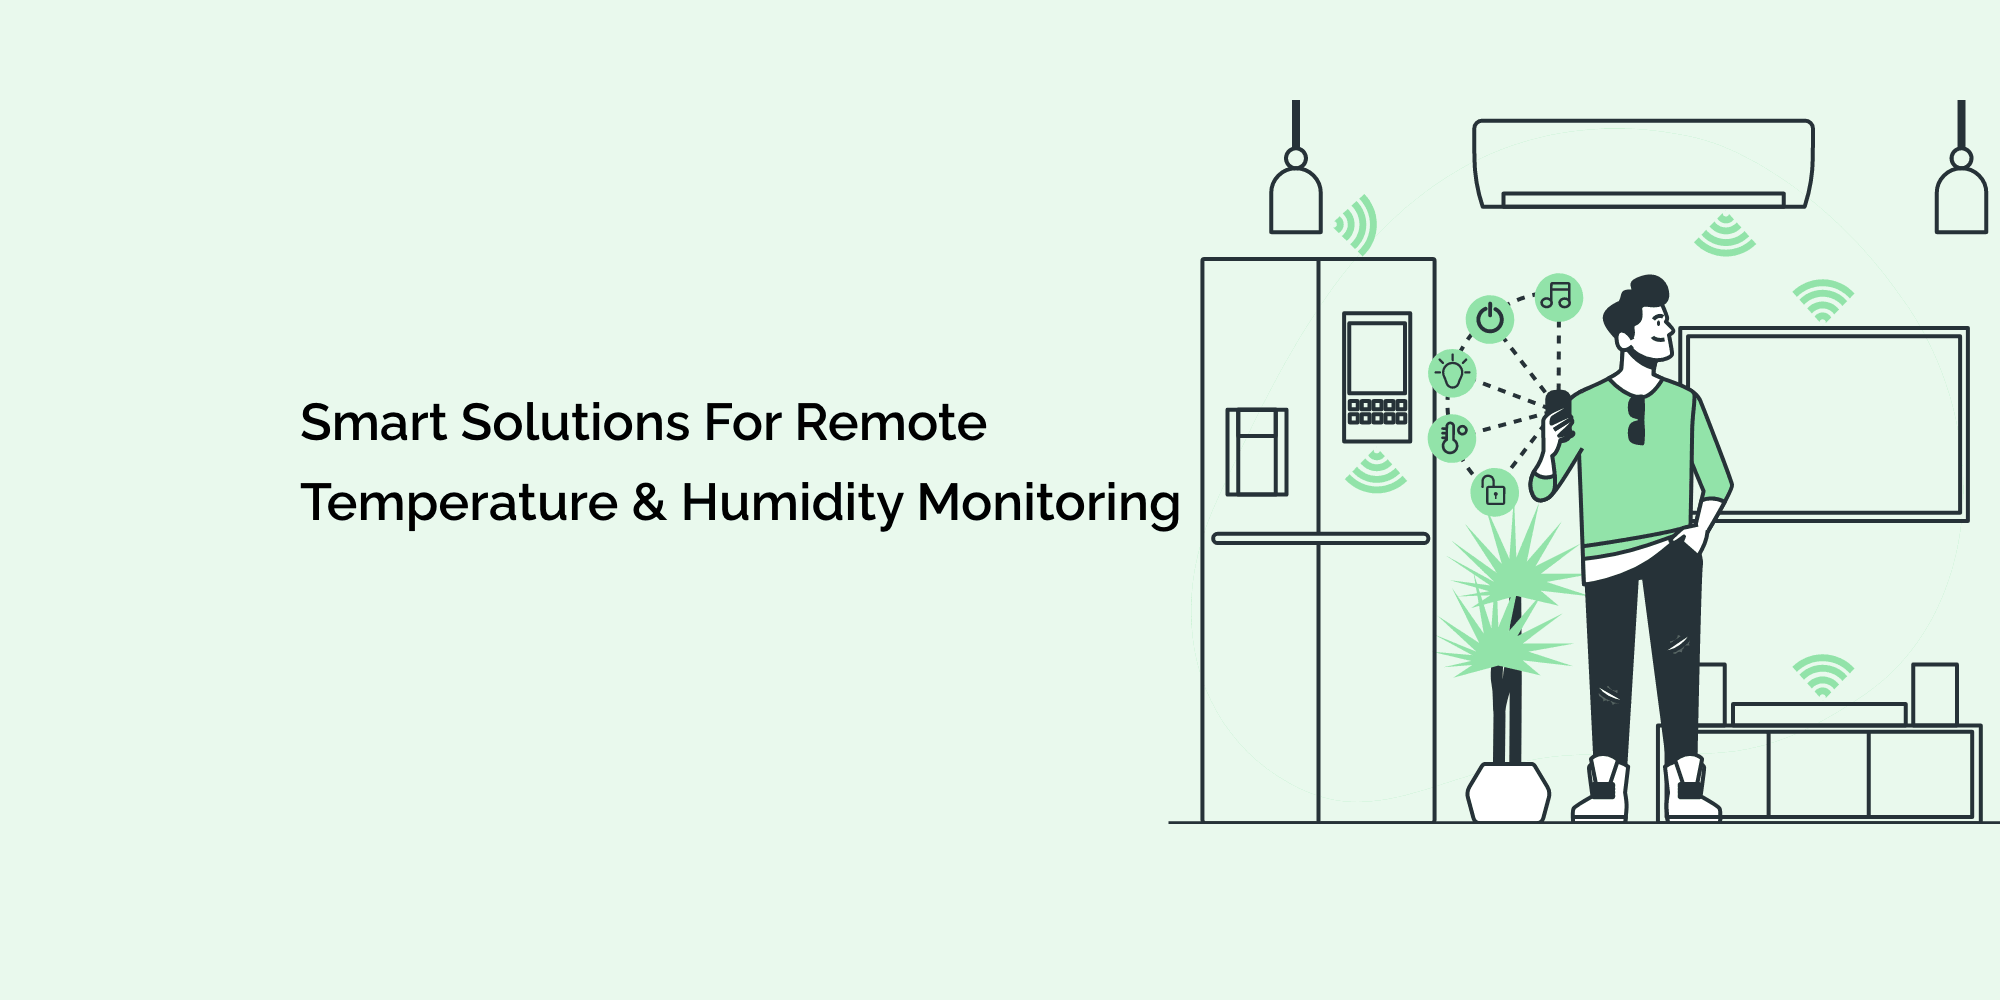 Smart Solutions for Remote Temperature and Humidity Monitoring